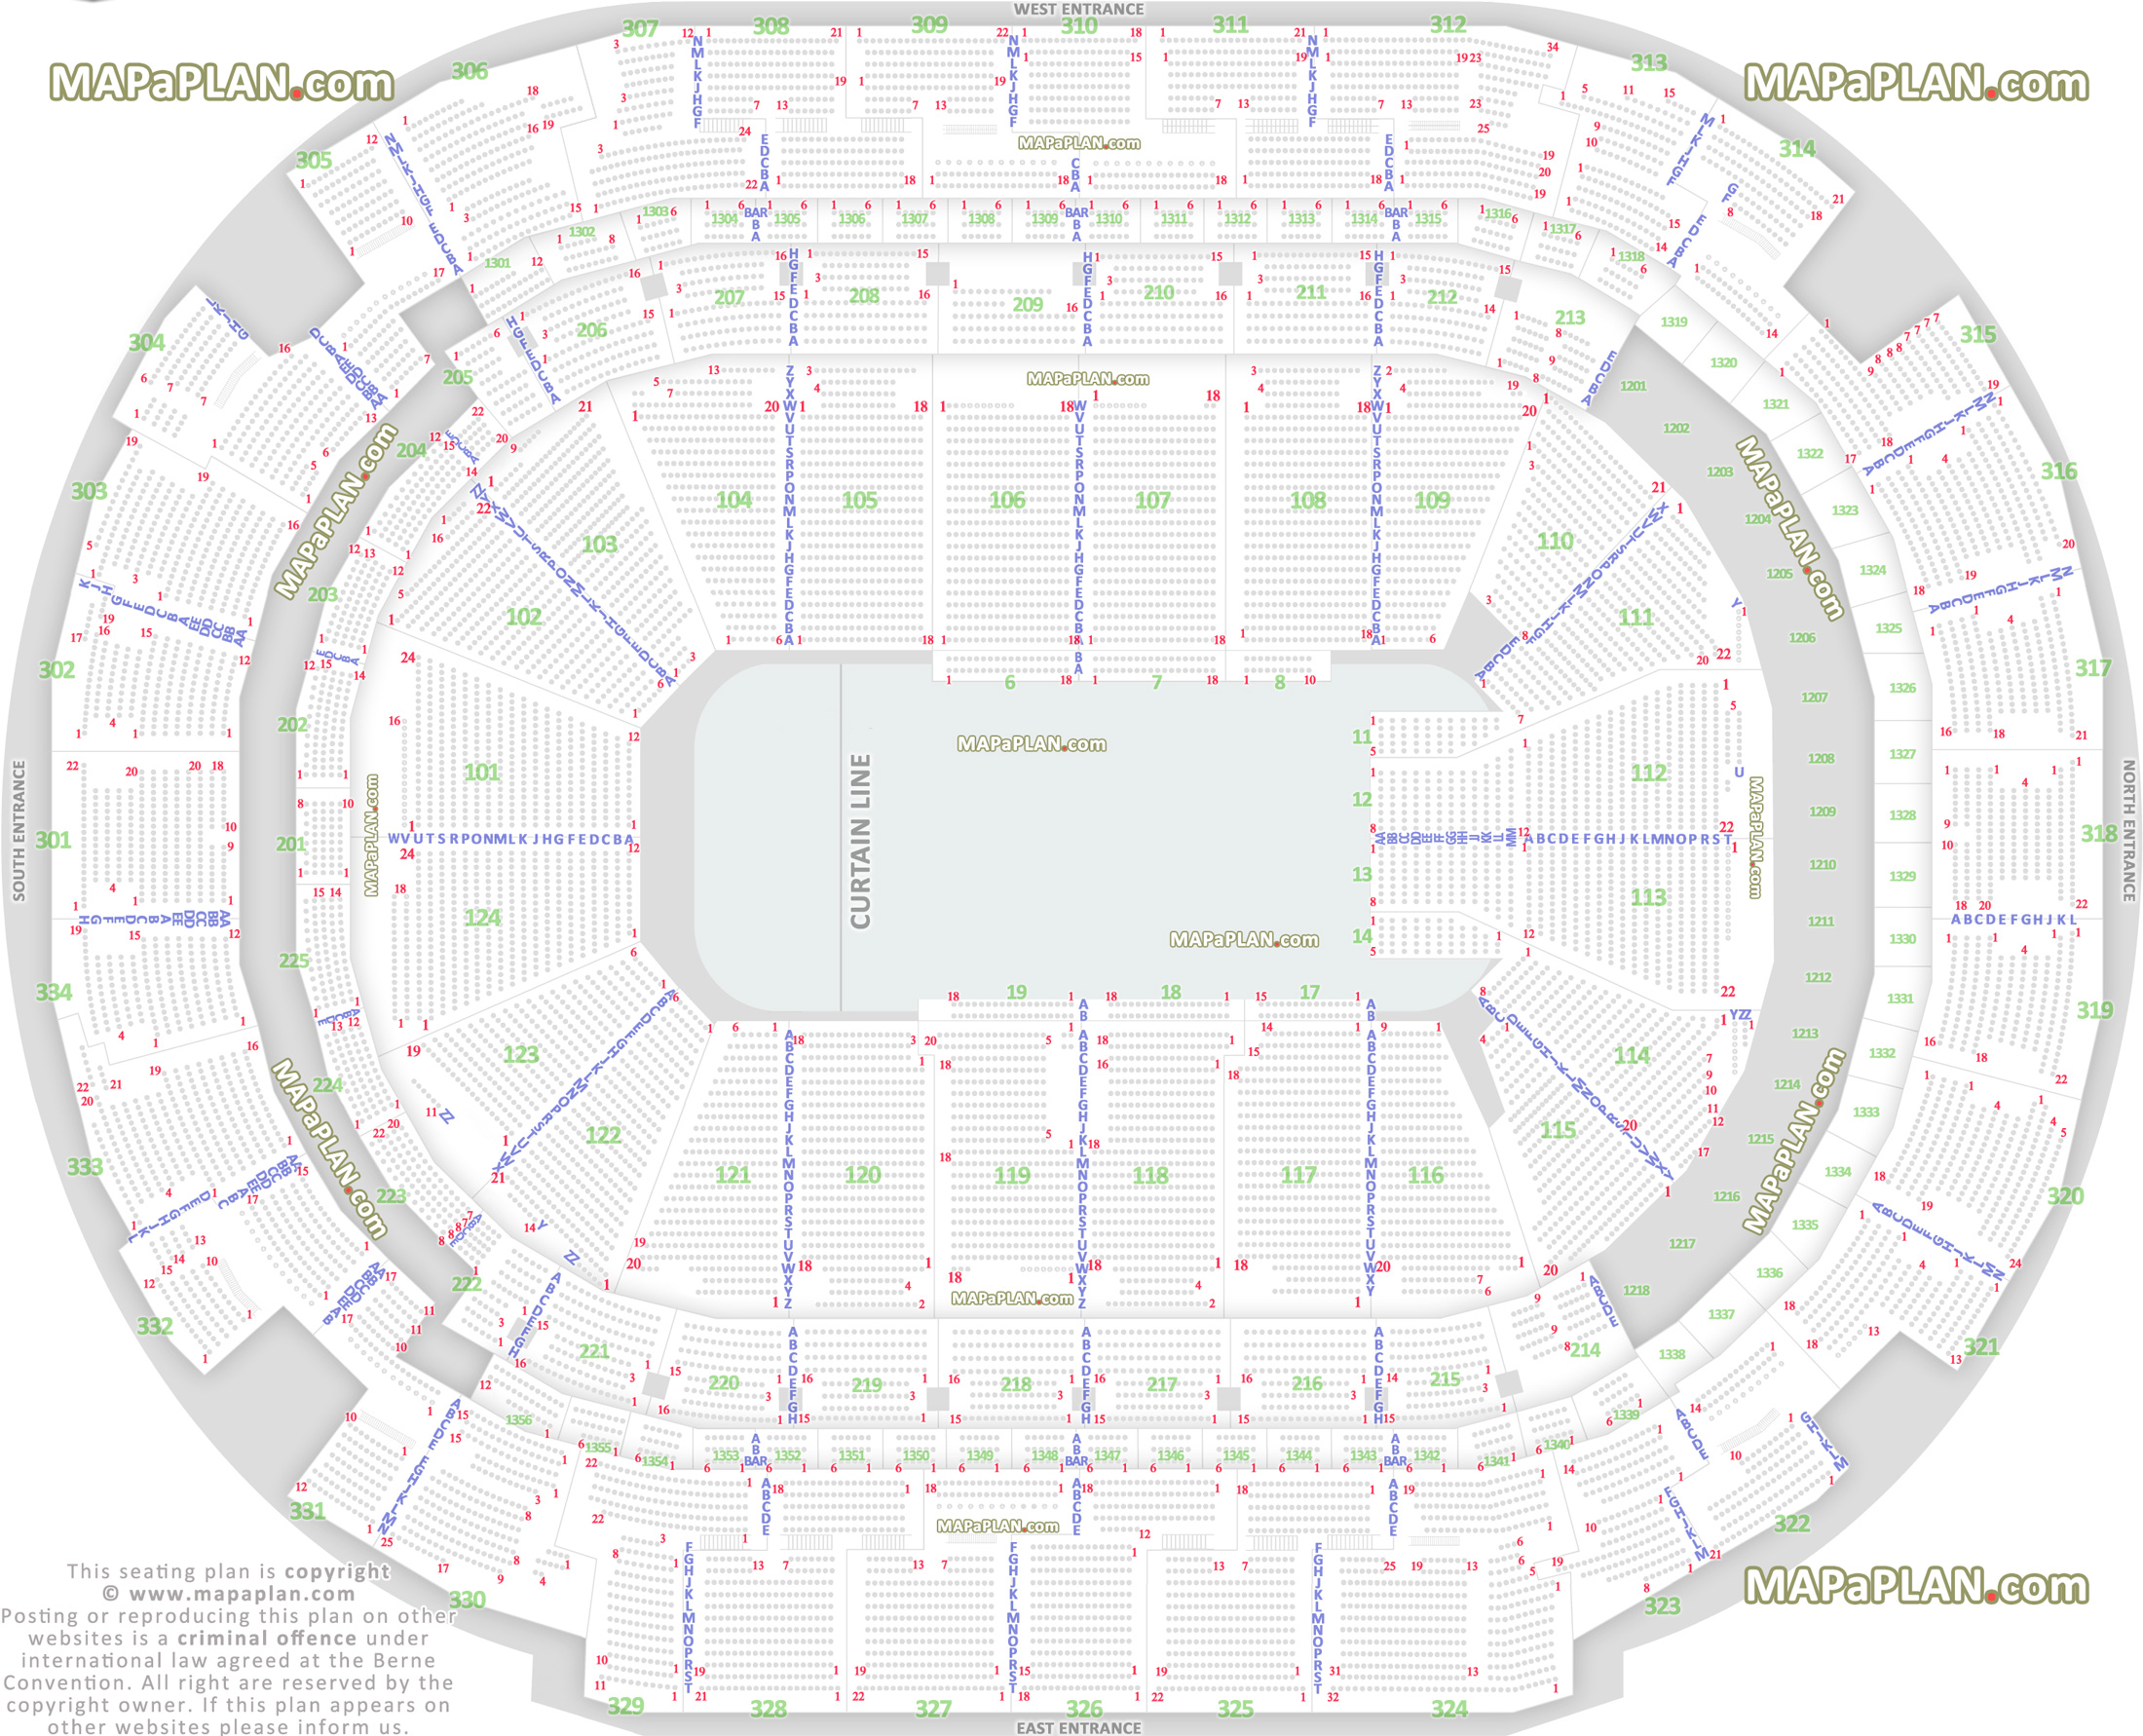 disney on ice find my seat diagram showing row numbering mezzanine vip lounge boxes arrangement Dallas American Airlines Center seating chart